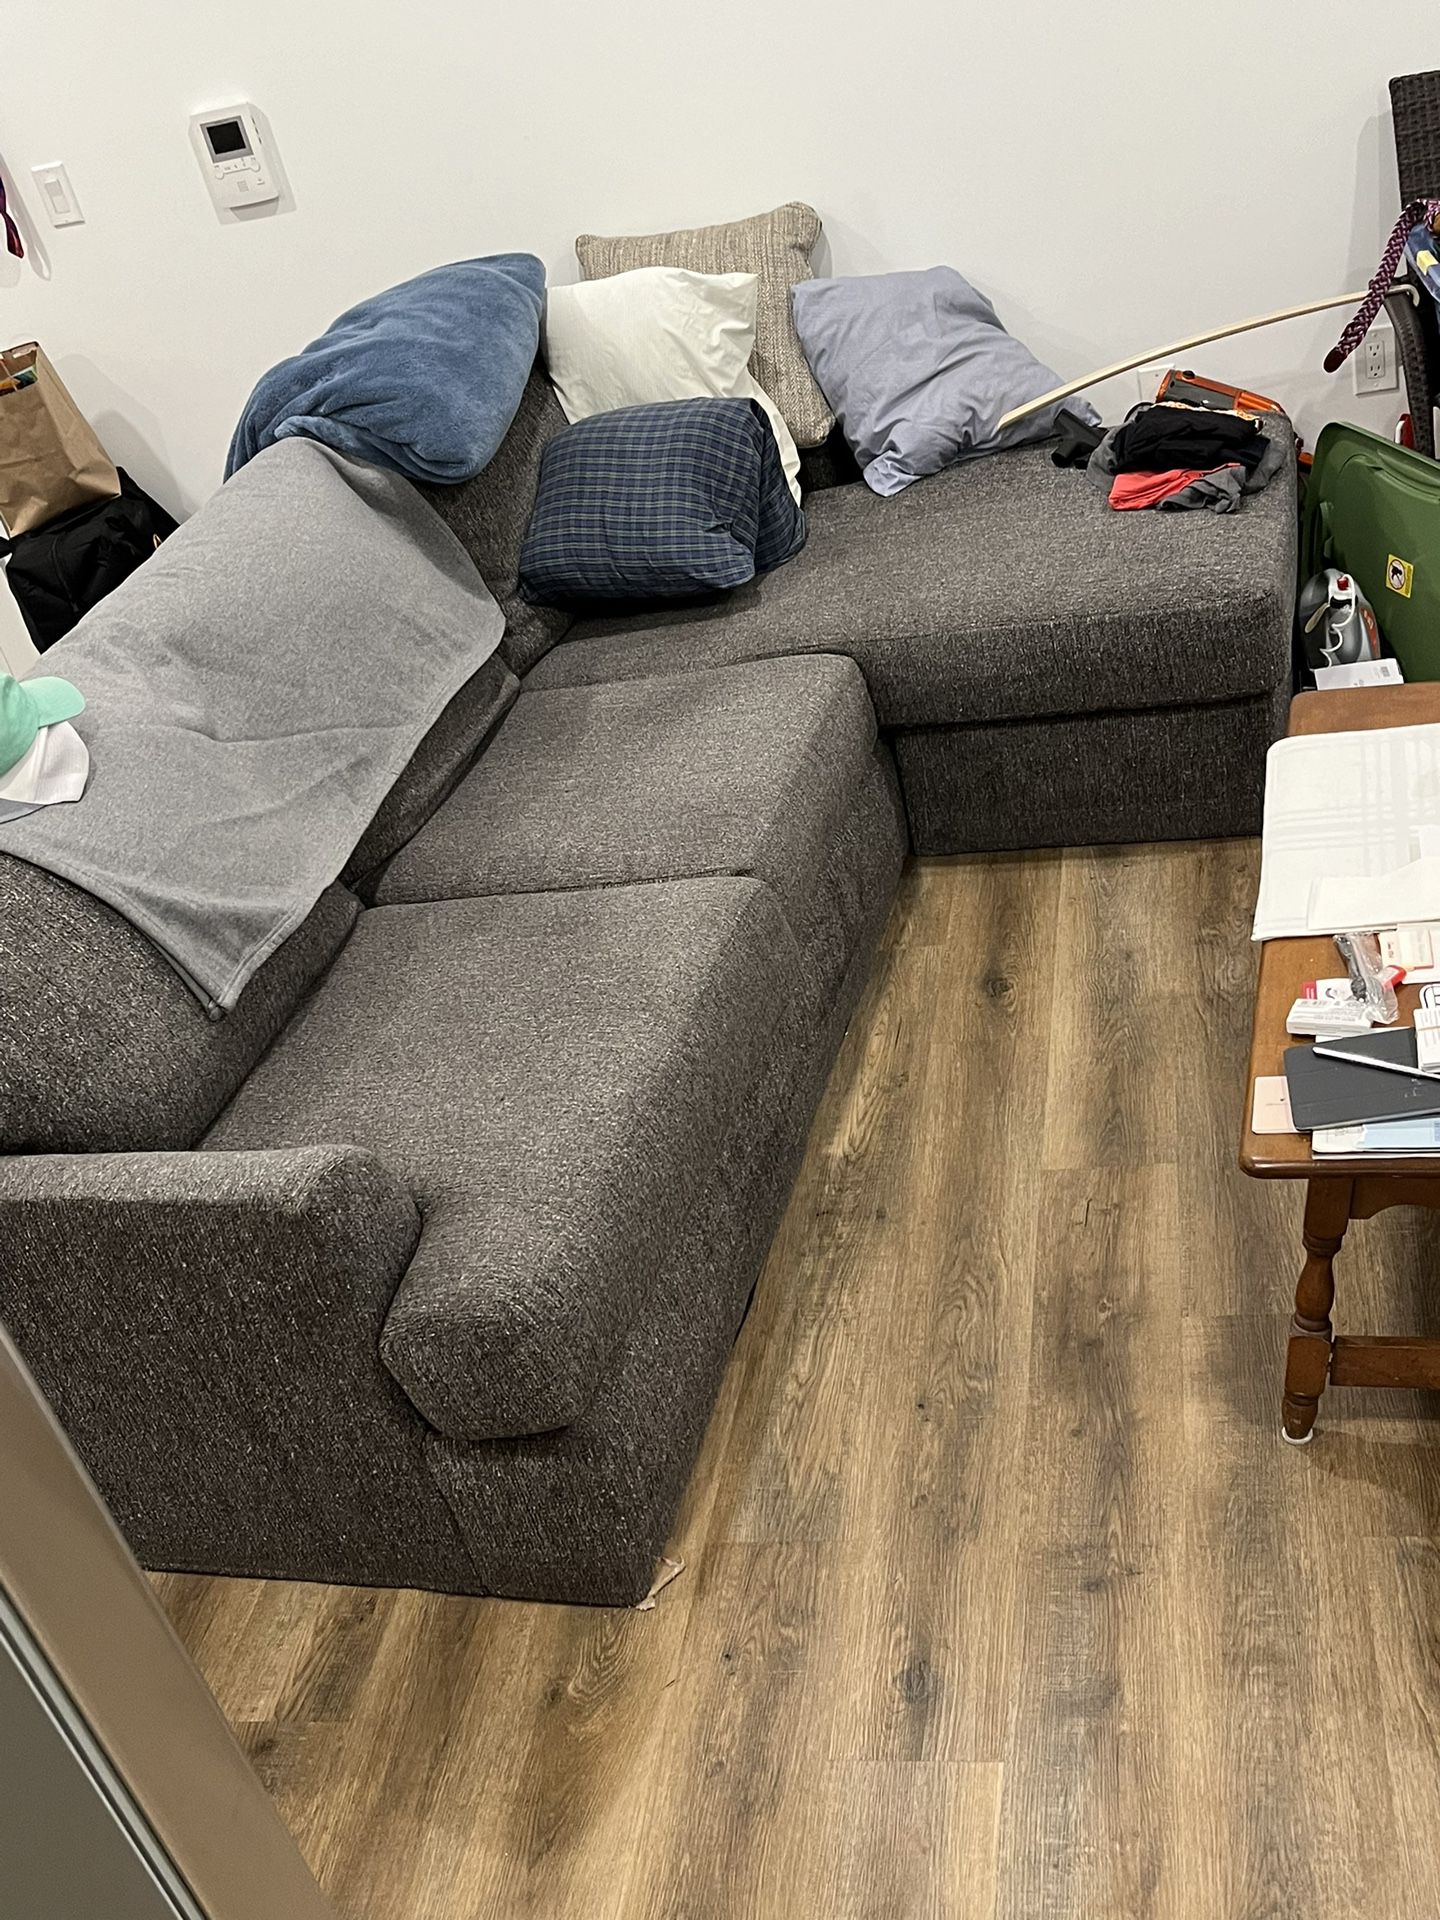 Price Reduction - Couch 